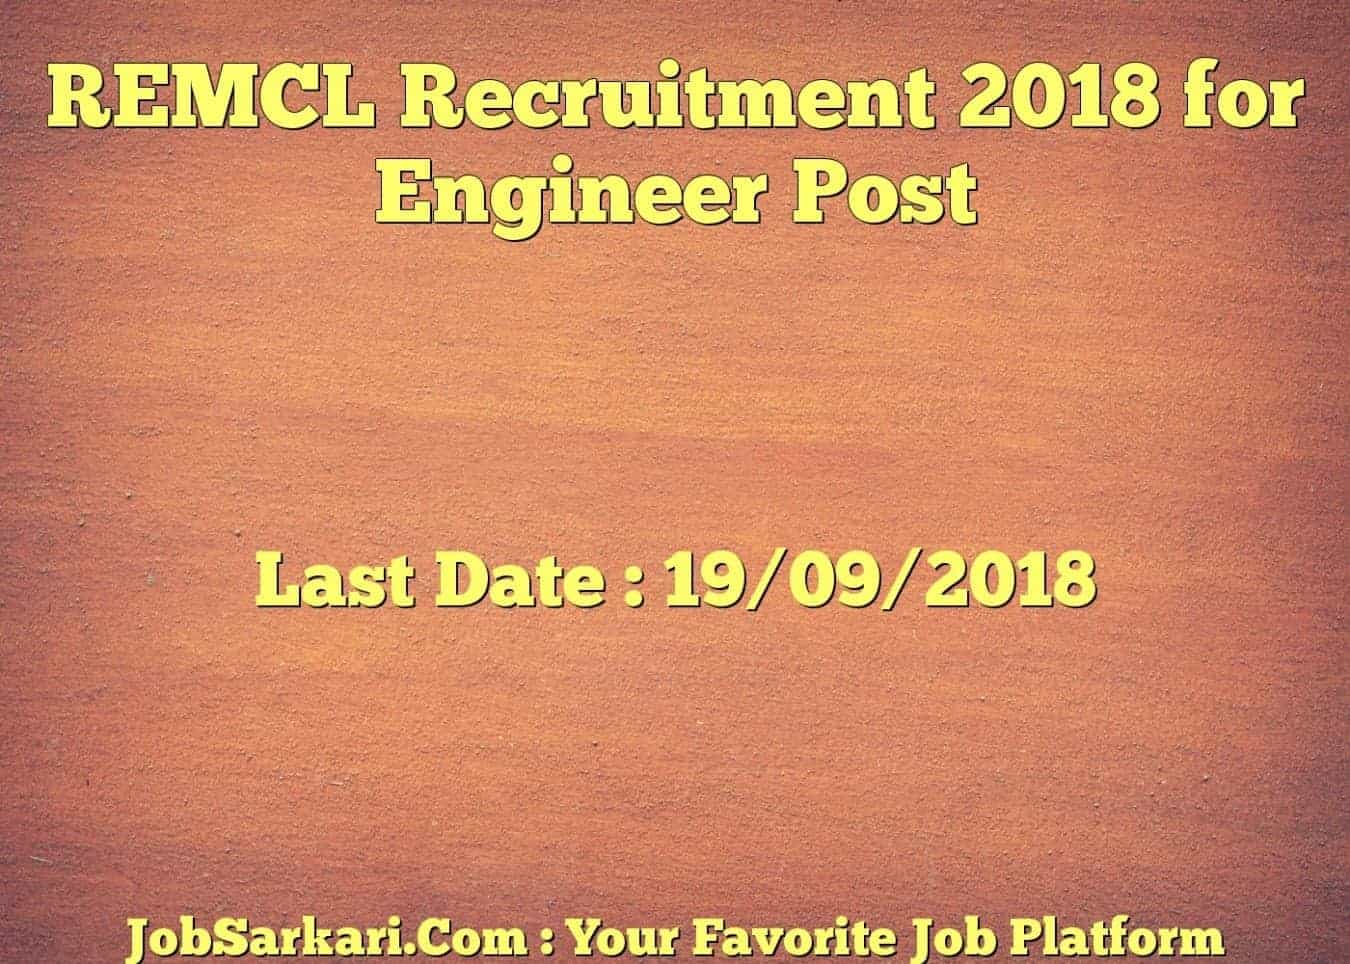 REMCL Recruitment 2018 for Engineer Post